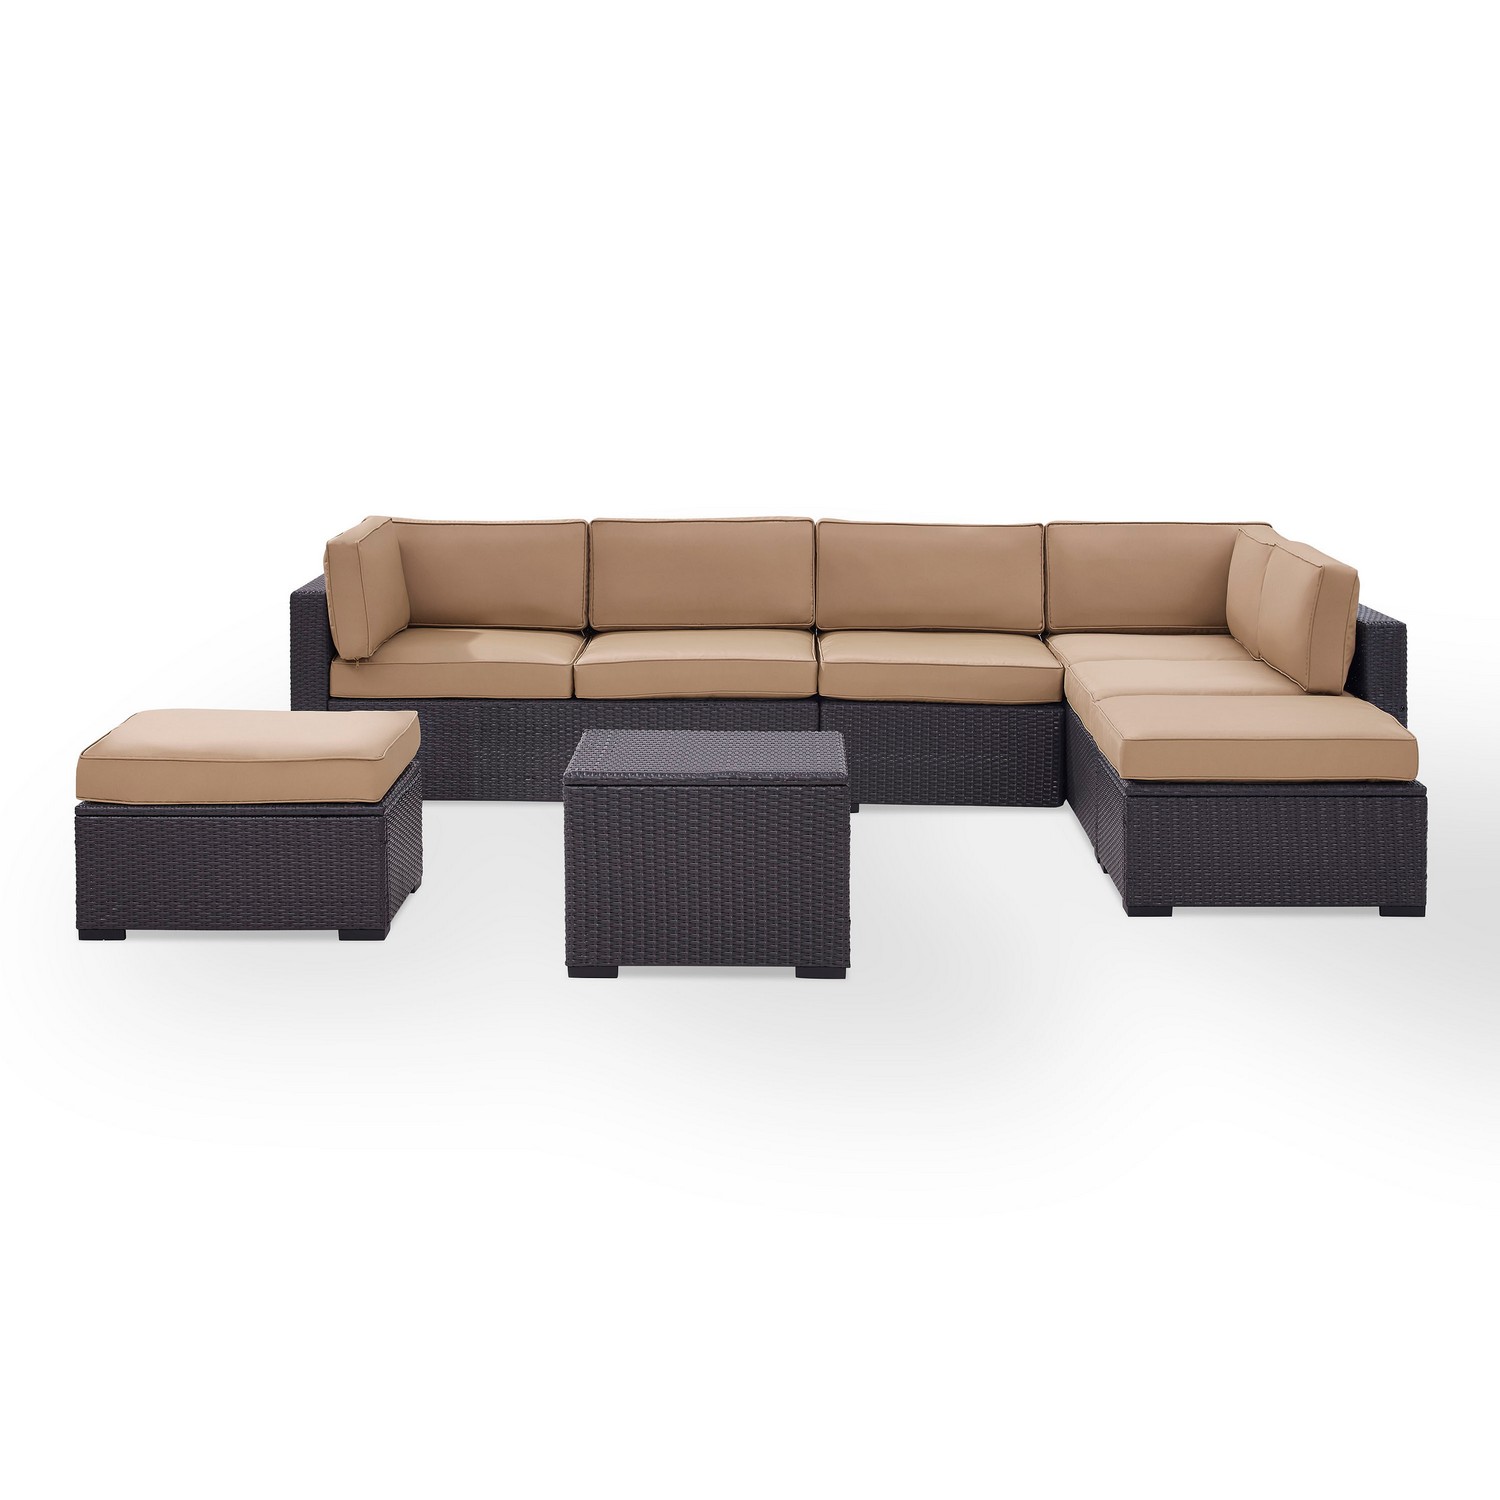 Crosley Biscayne 6-PC Outdoor Wicker Sectional Set - 2 Loveseats, Armless Chair, Coffee Table, 2 Ottomans - Mocha/Brown